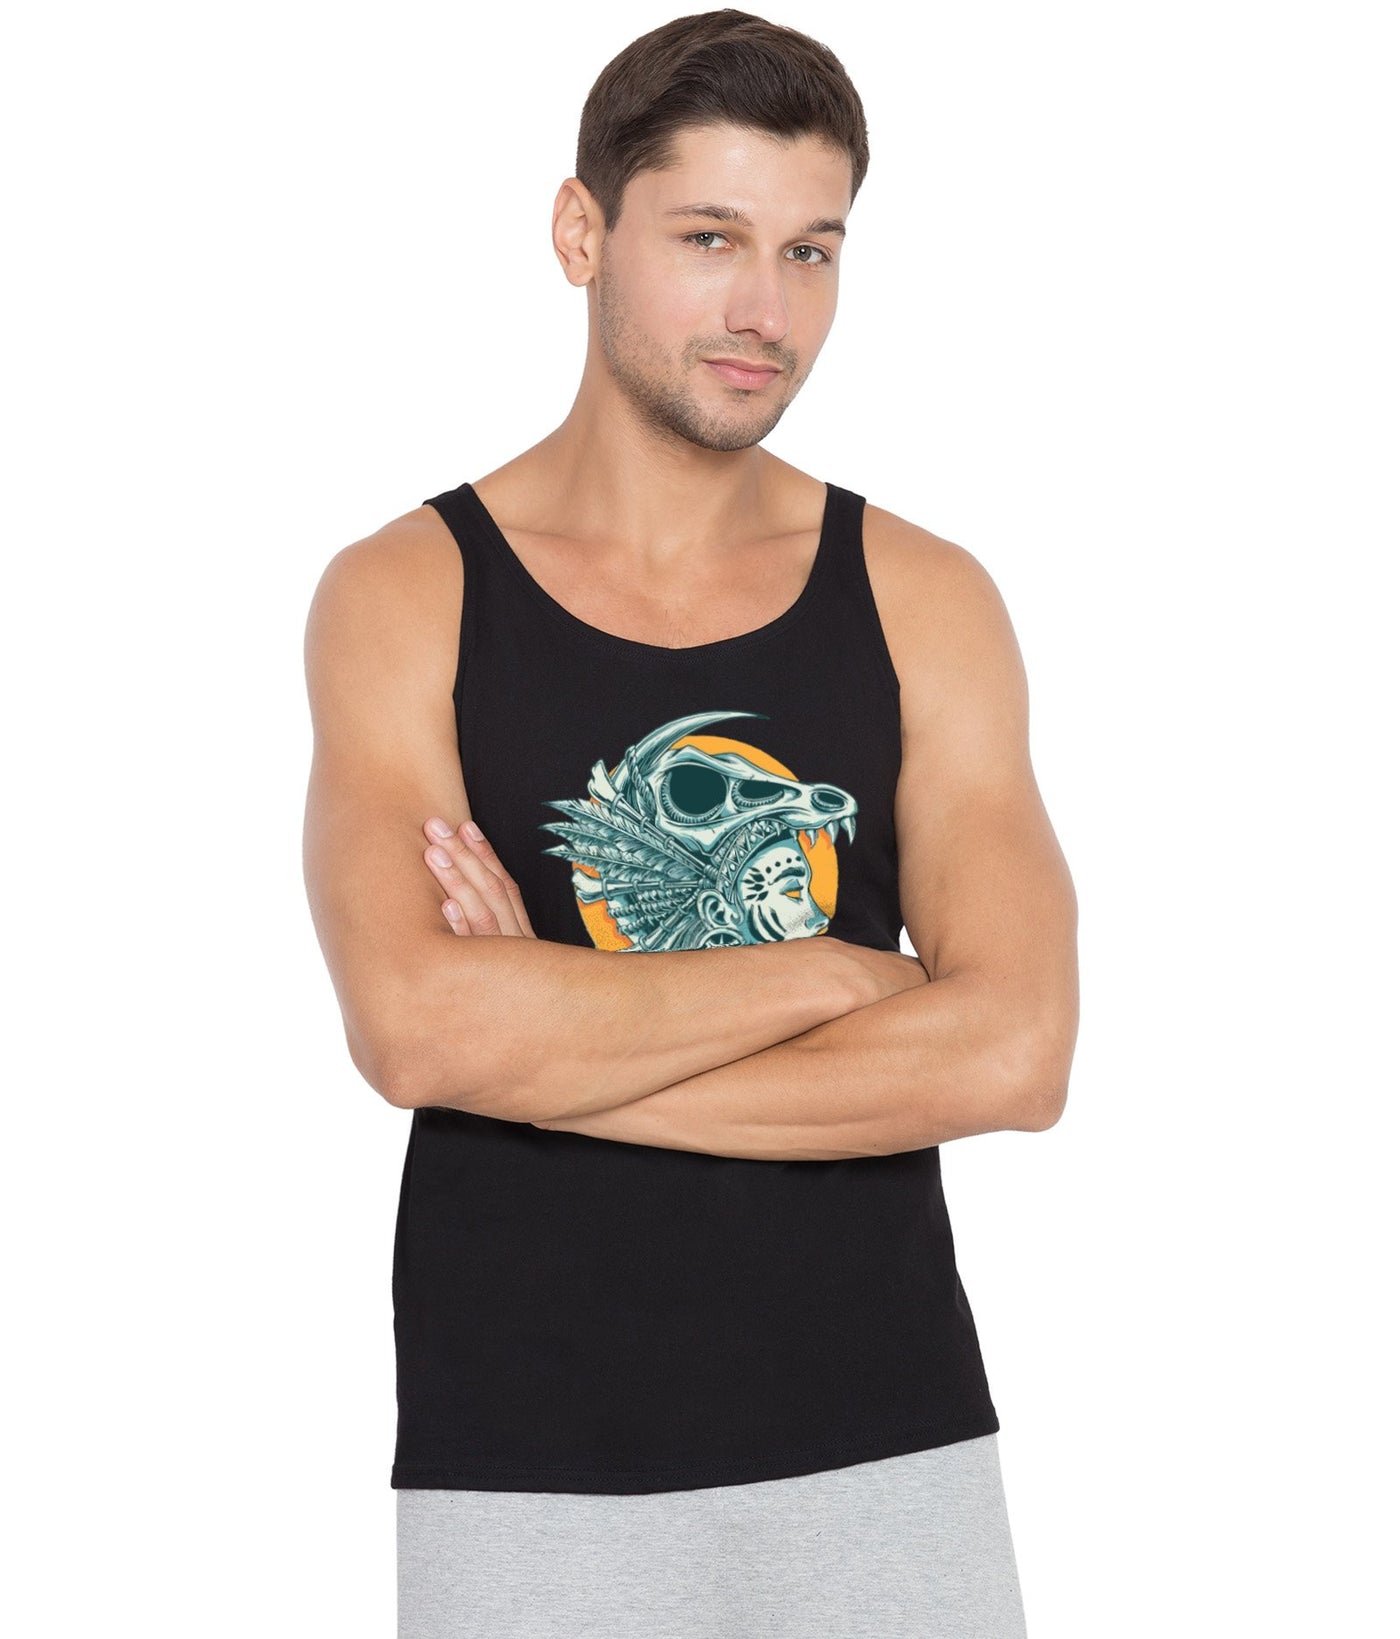 Buy Men's Vests Online on Hapuka.com· Wearing A Vest To The Gym · Stylish Looking Vests For Gymming · Printed Vests That You Can Wear ...